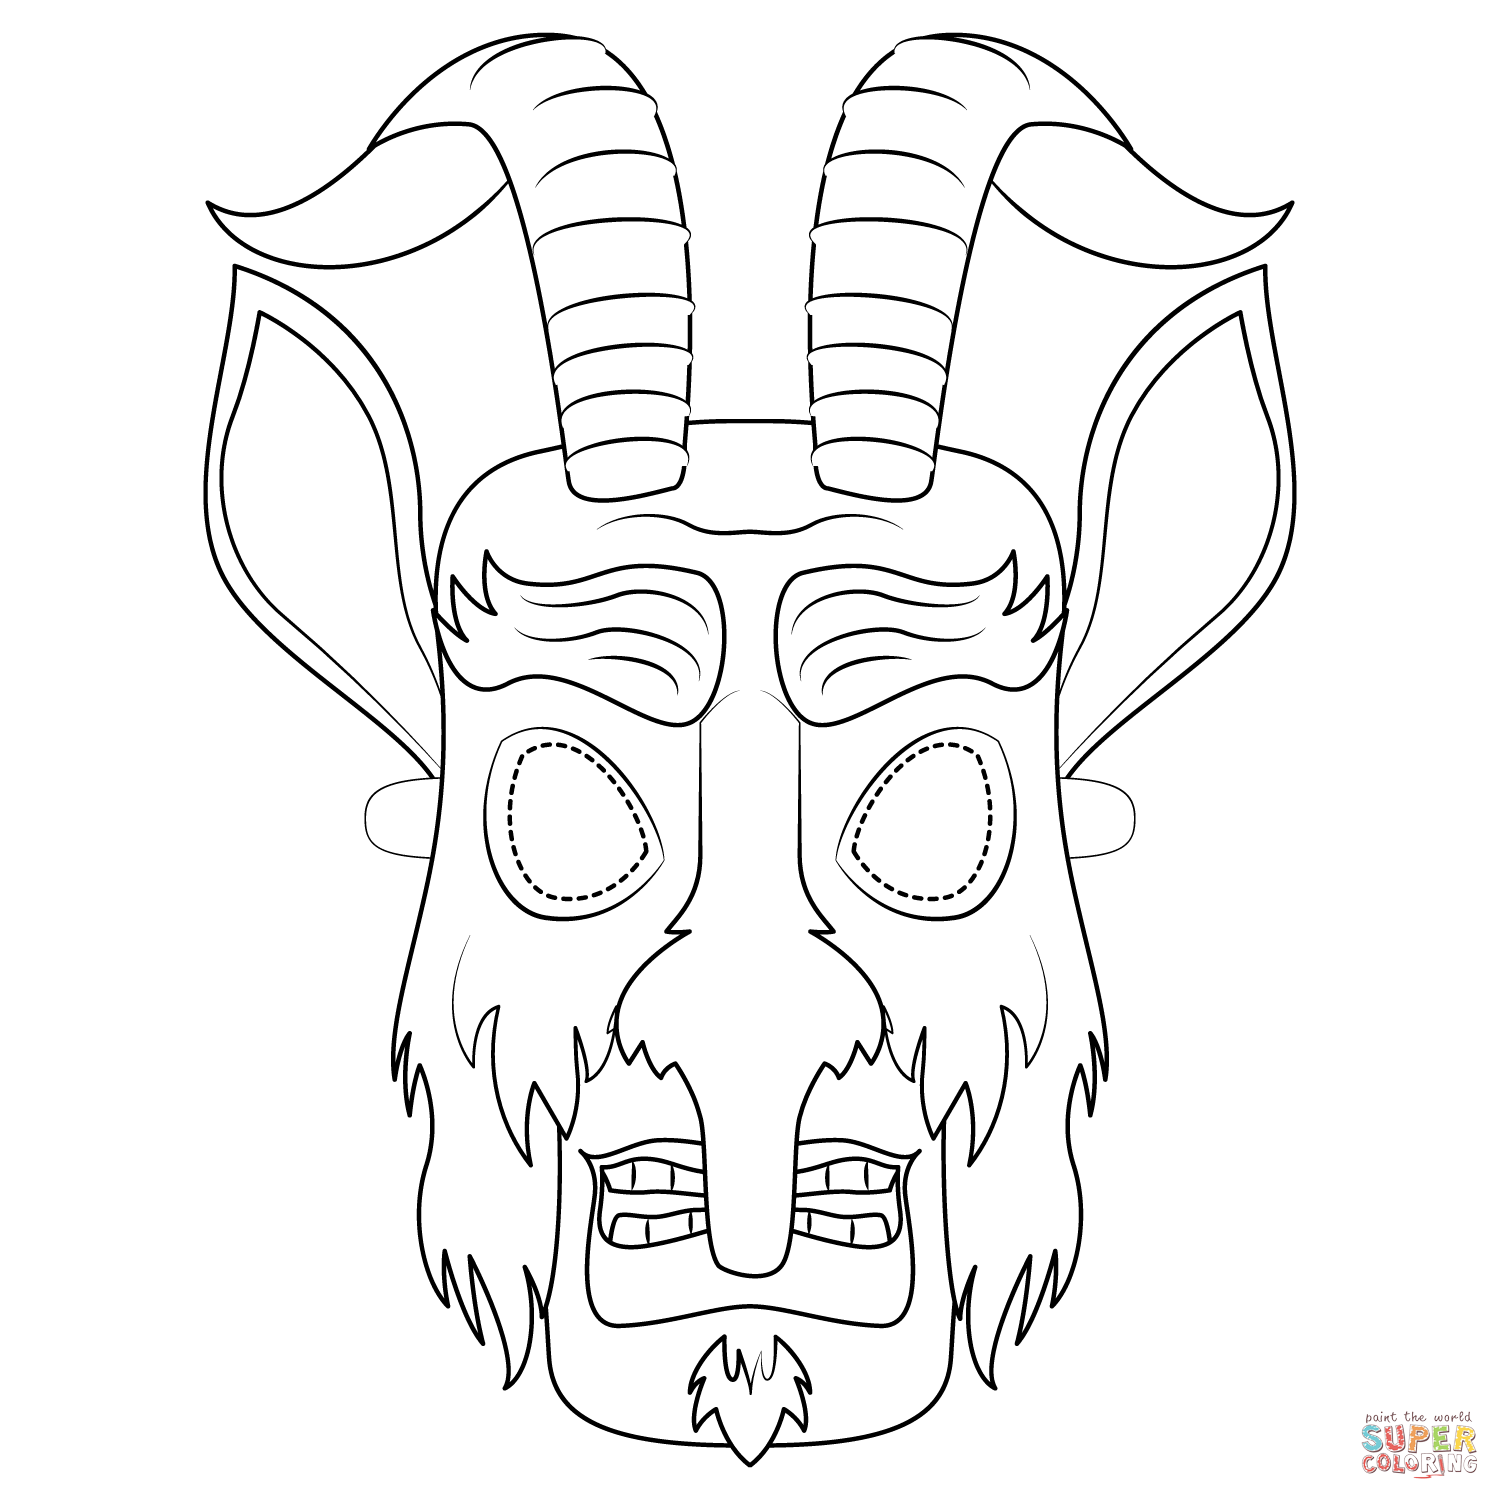 Krampus mask coloring page free printable coloring pages